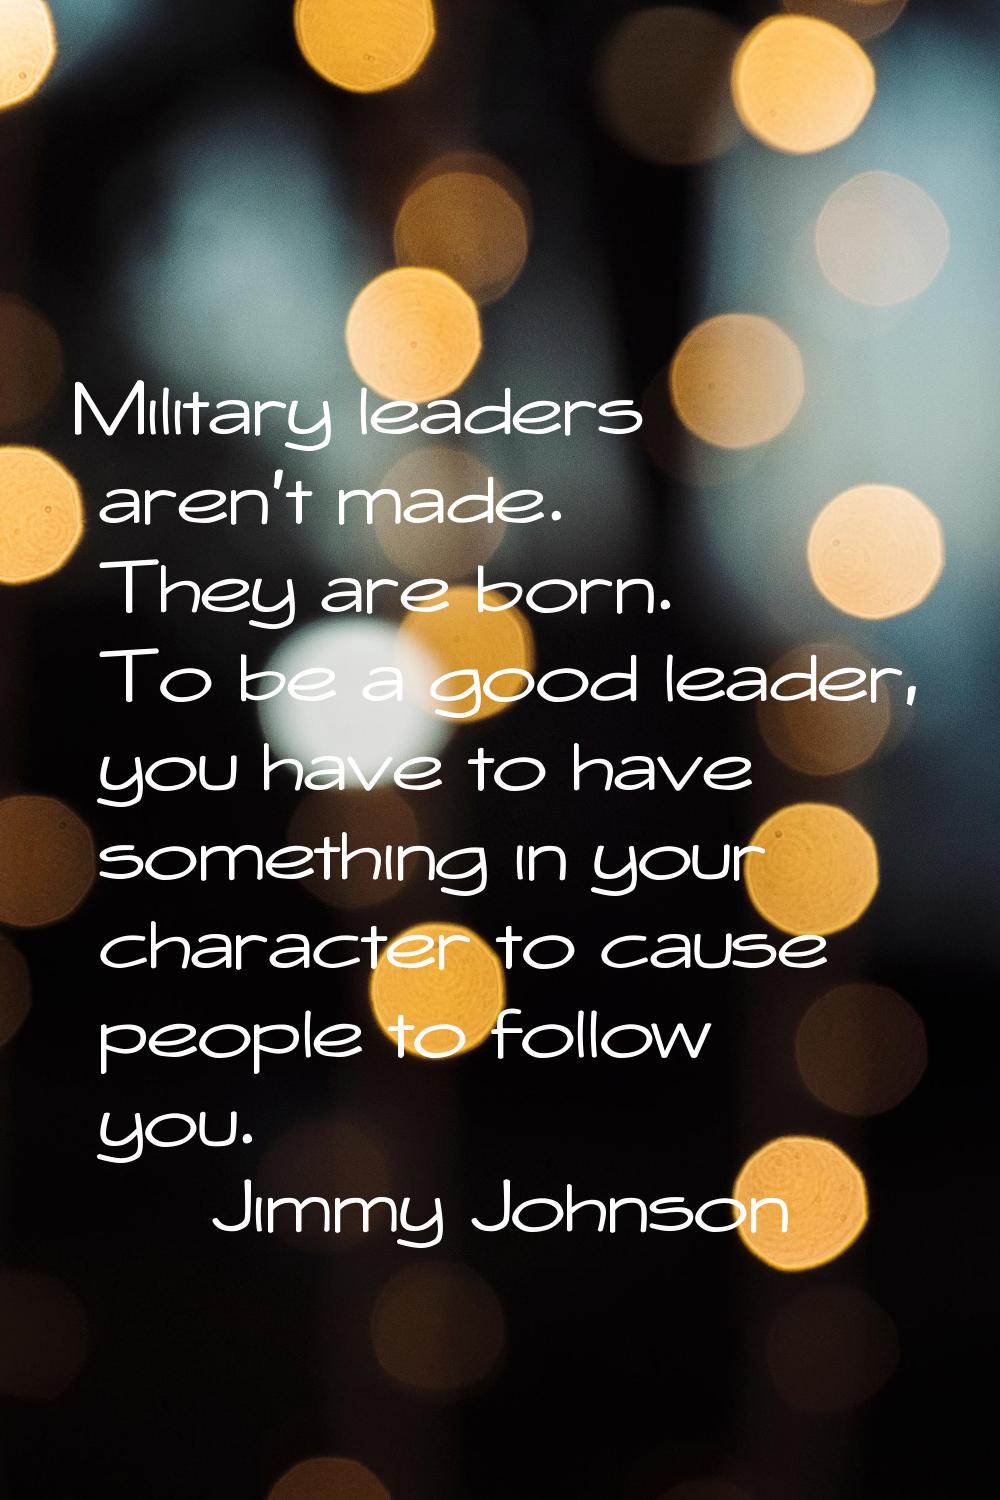 Military leaders aren't made. They are born. To be a good leader, you have to have something in you